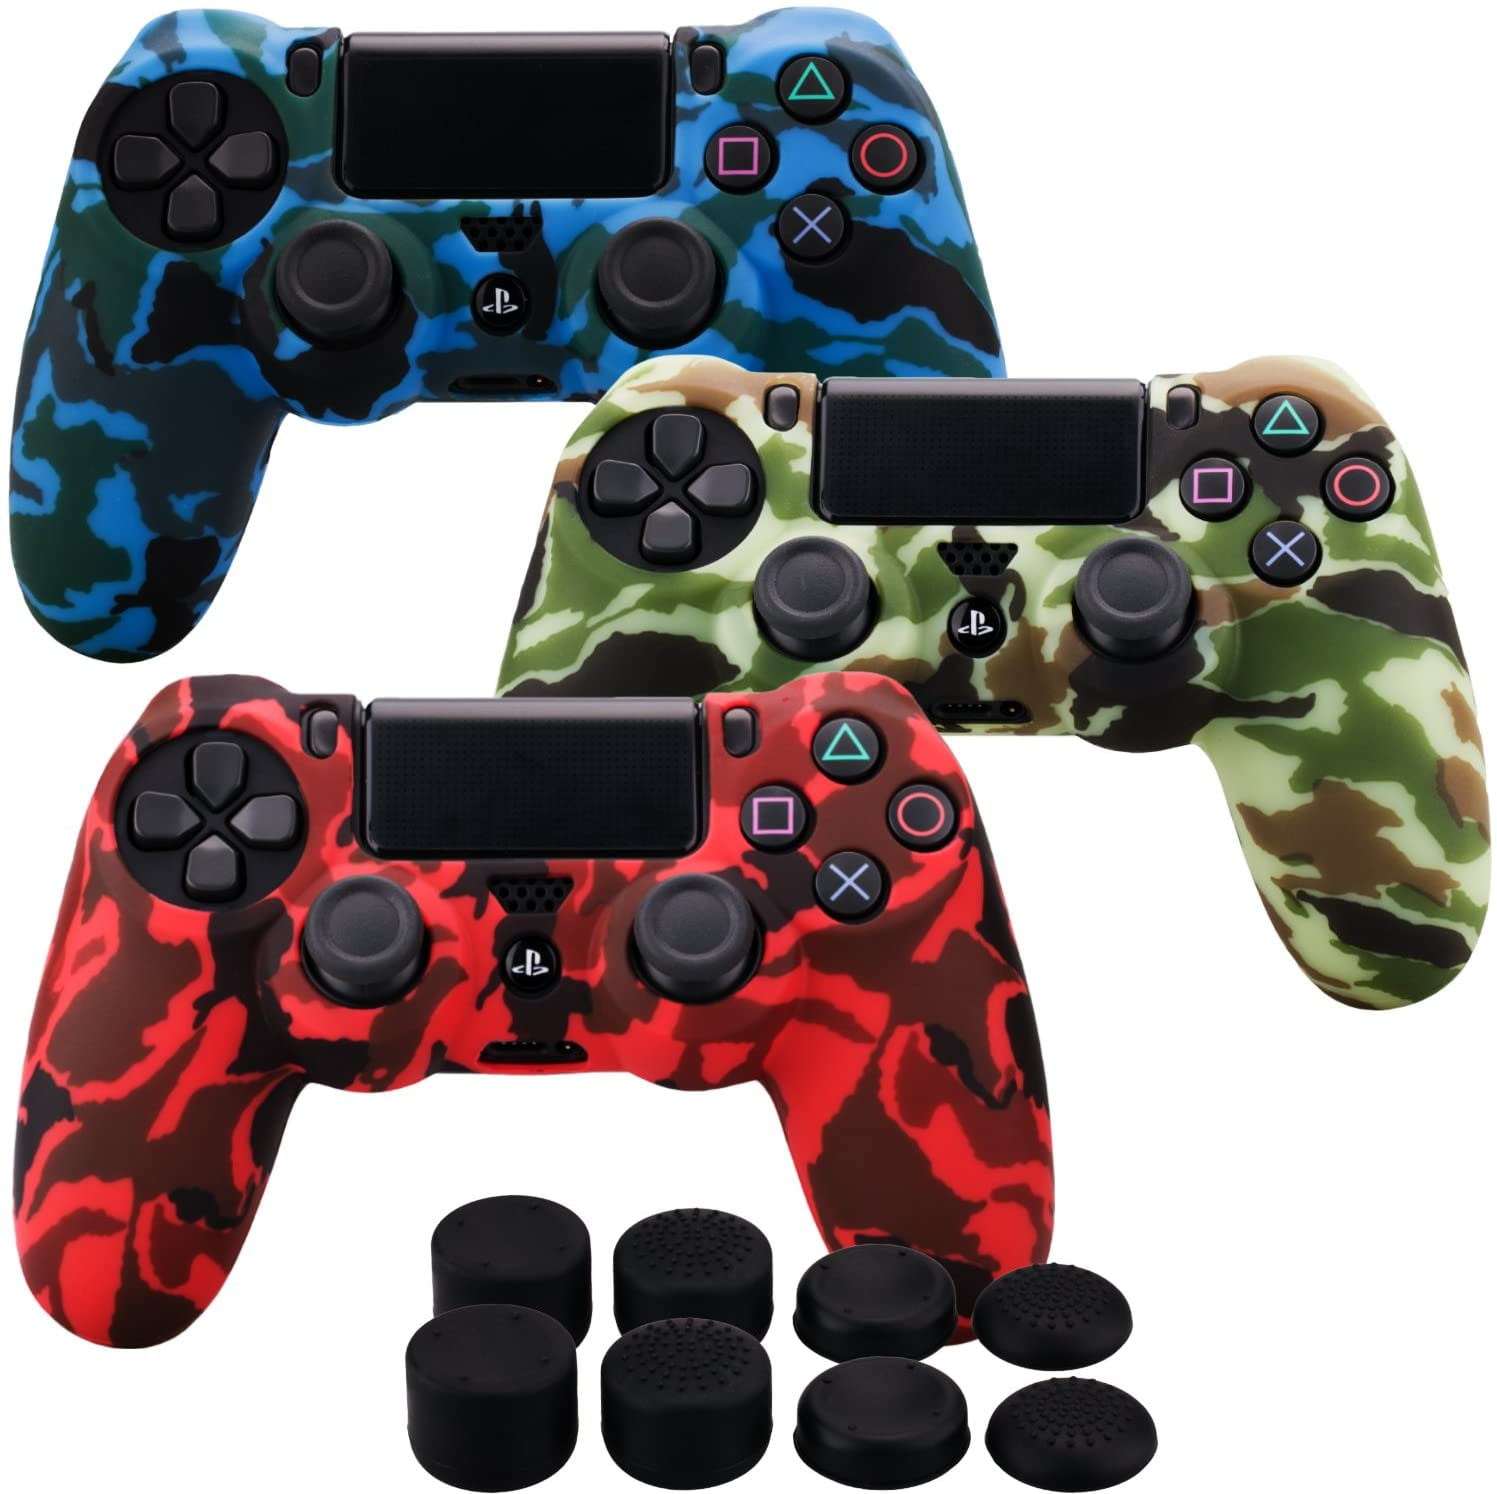 Silicone rubber cover skin case anti-slip Water Transfer Customize Camouflage for PS4/SLIM/PRO controller x 3(red & yellow & blue) + FPS PRO extra height thumb grips x 8